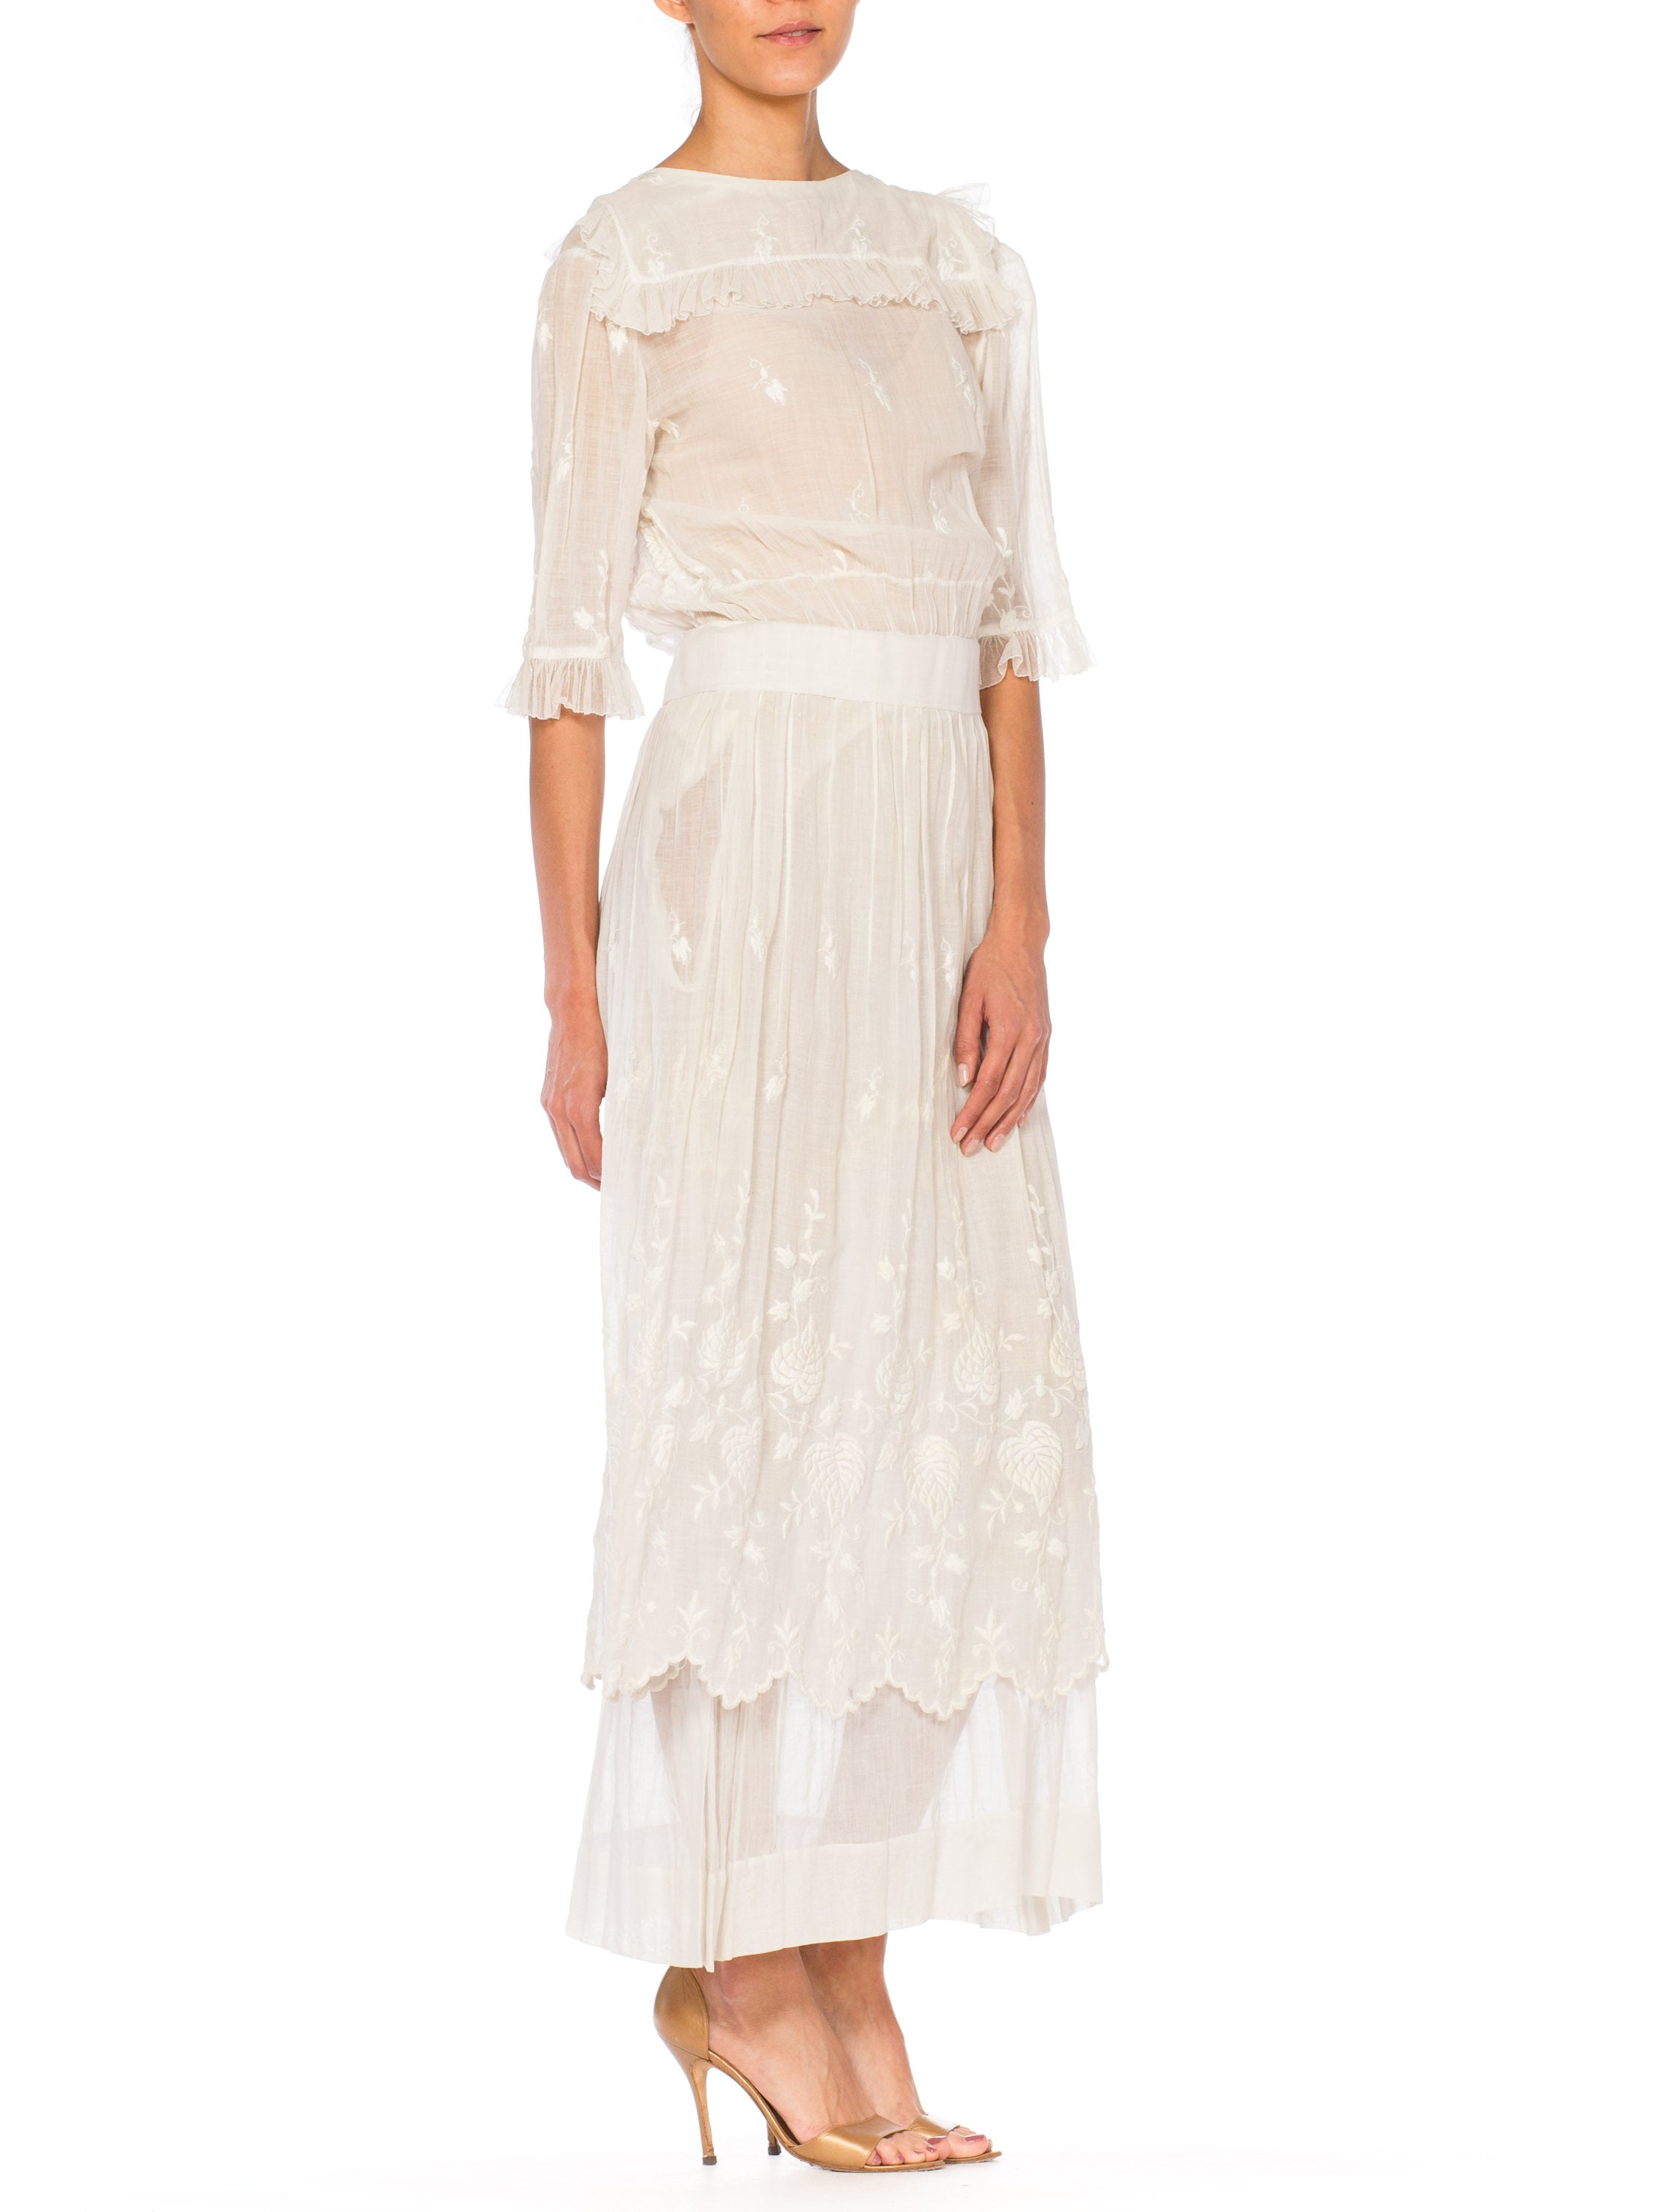 Edwardian White Embroidered Cotton Voile Tea Dress With Sleeves – MORPHEW